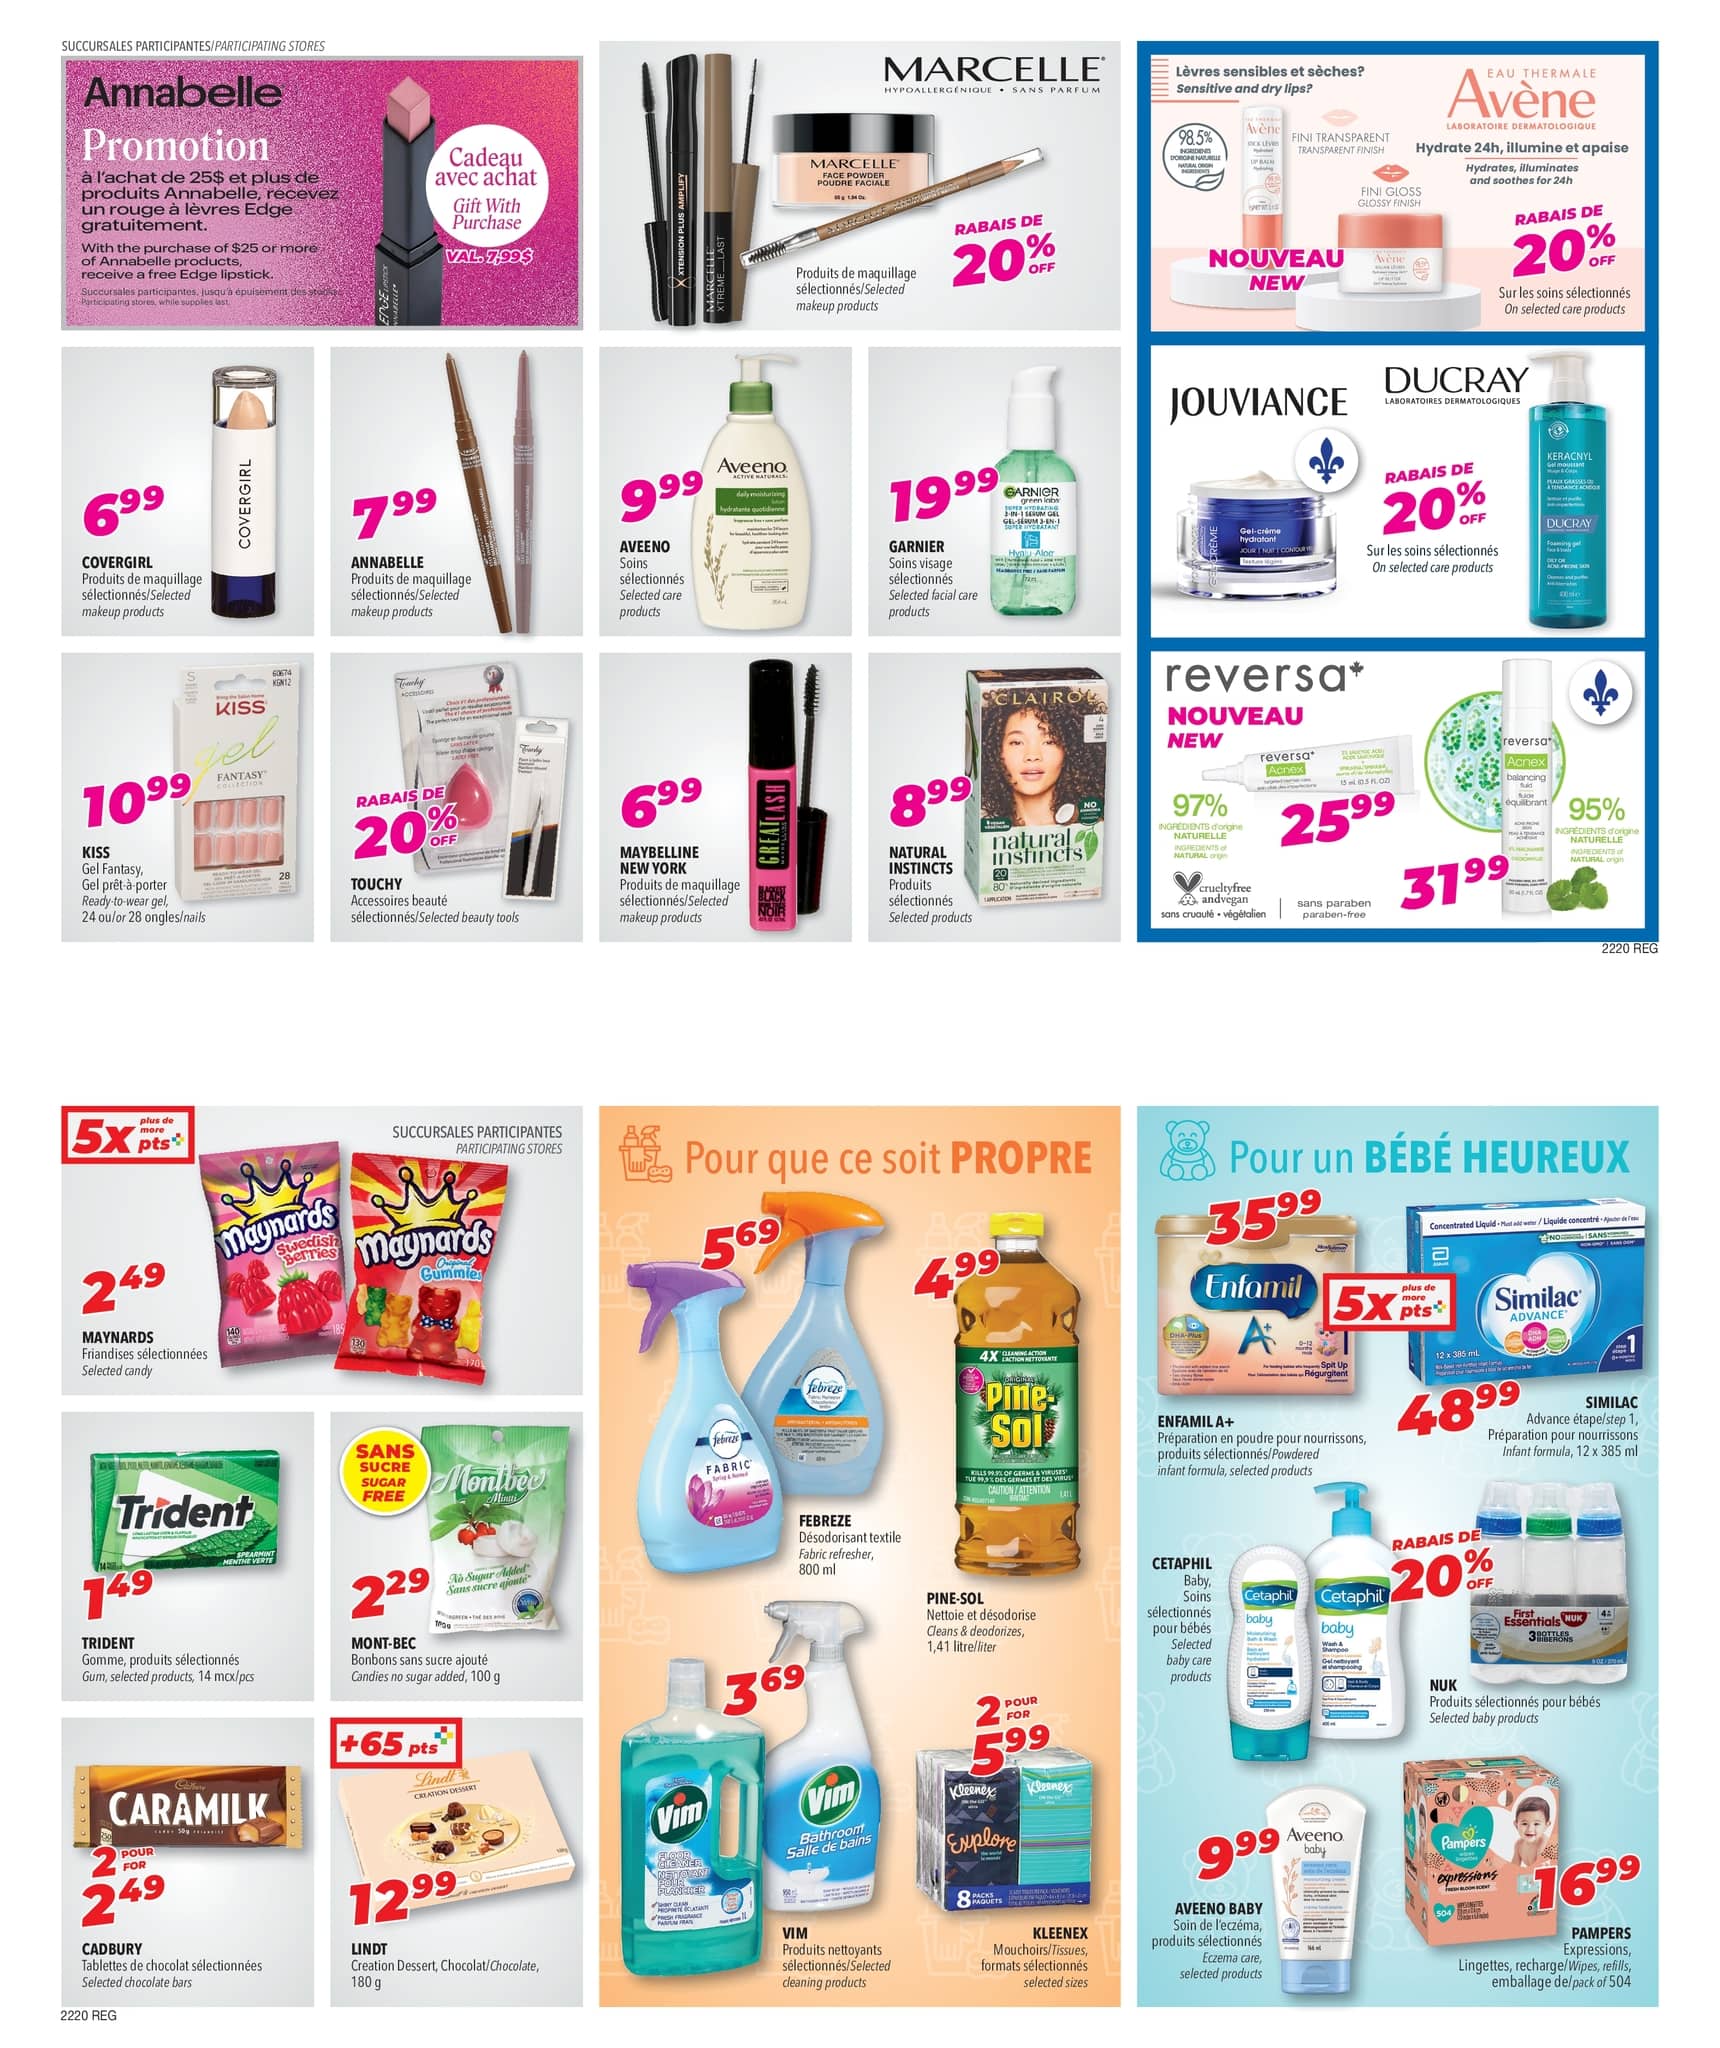 Familiprix - Weekly Flyer Specials - Page 6